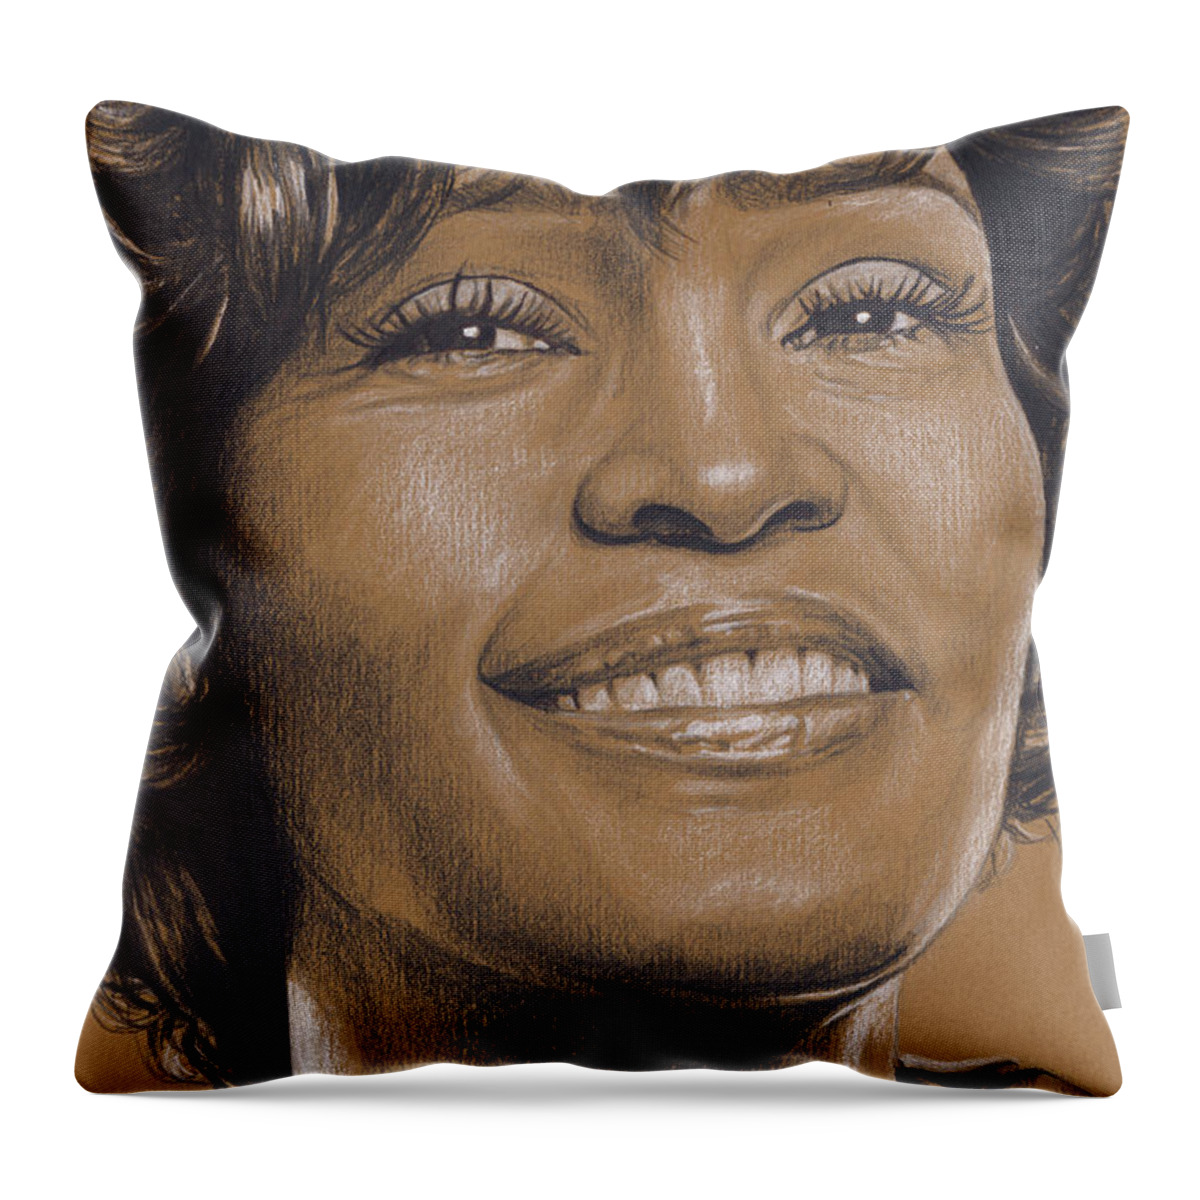 Singer Throw Pillow featuring the drawing I'm every woman by Rob De Vries